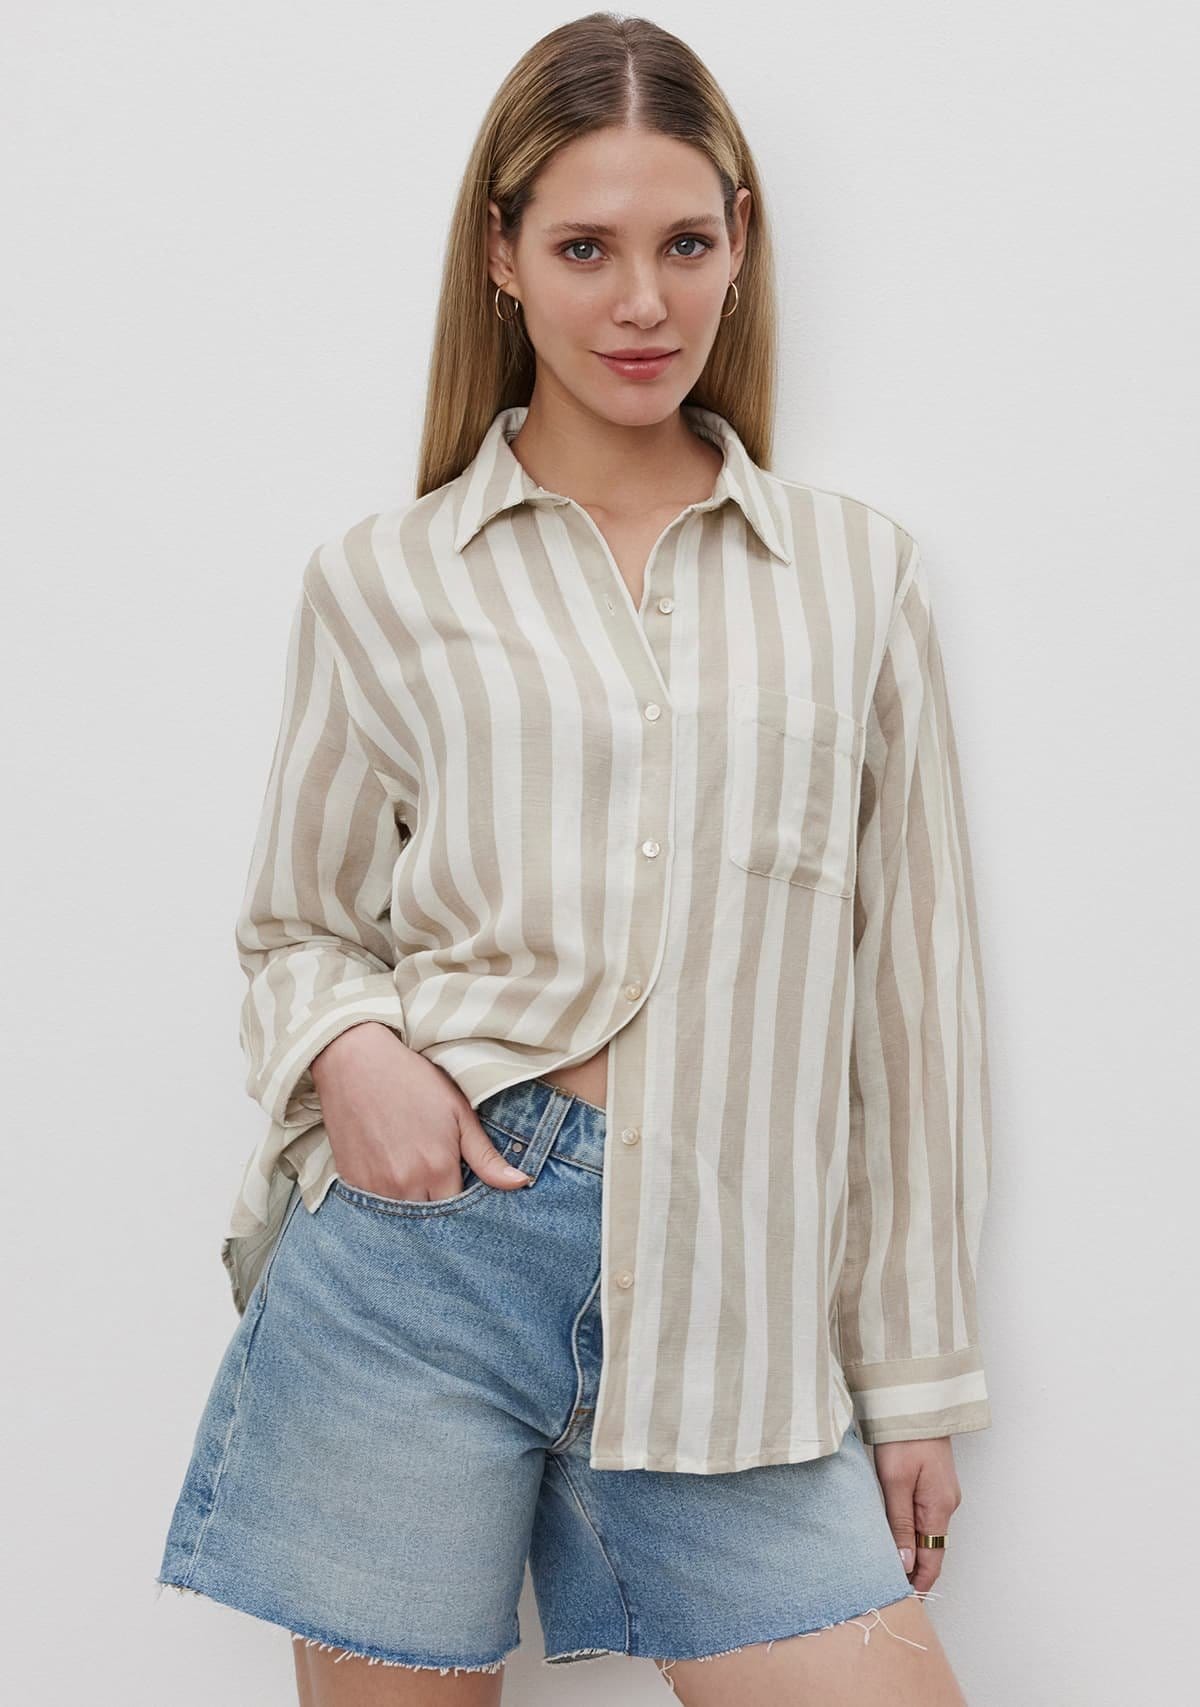 Model wearing the Harlow Striped Linen Button-Up Shirt